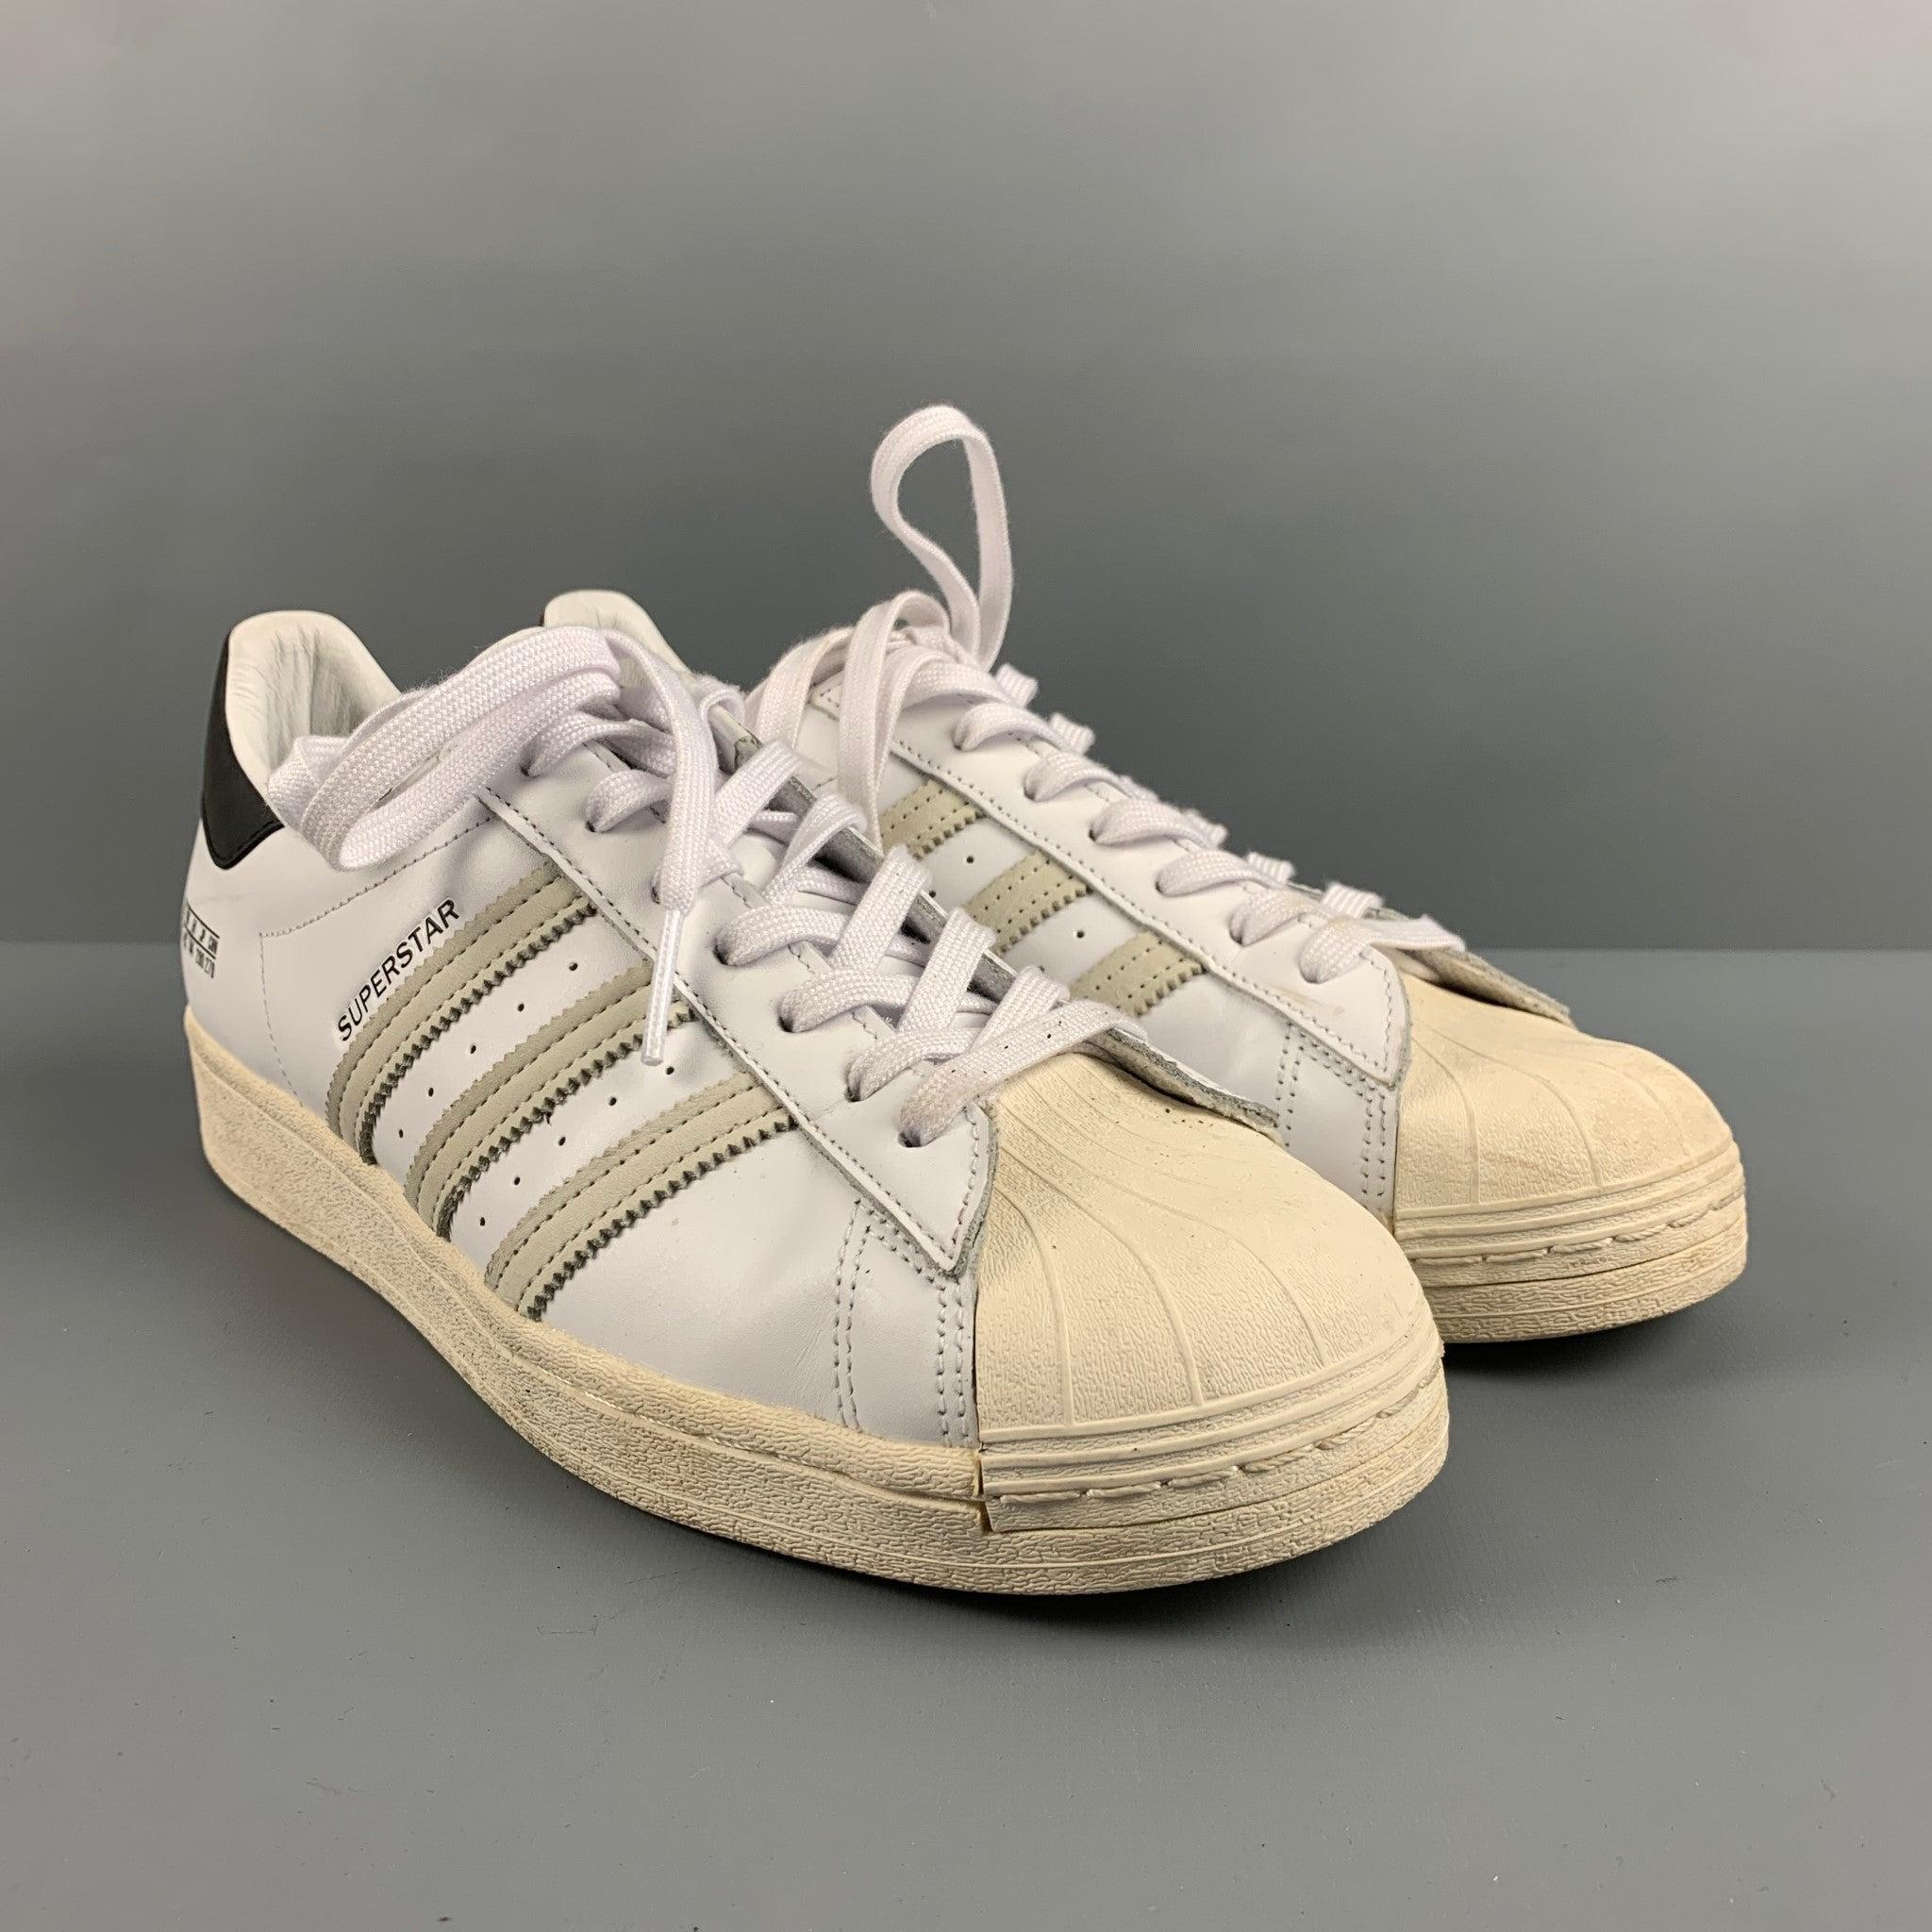 ADIDAS Superstar sneakers come in white leather with beige suede panels, beige rubber sole and toe cap. Very Good Pre-Owned Condition. Minor signs of Wear. 

Marked:   10Outsole: 11.75 x 4 inches  
  
  
 
Reference: 127376
Category: Sneakers
More